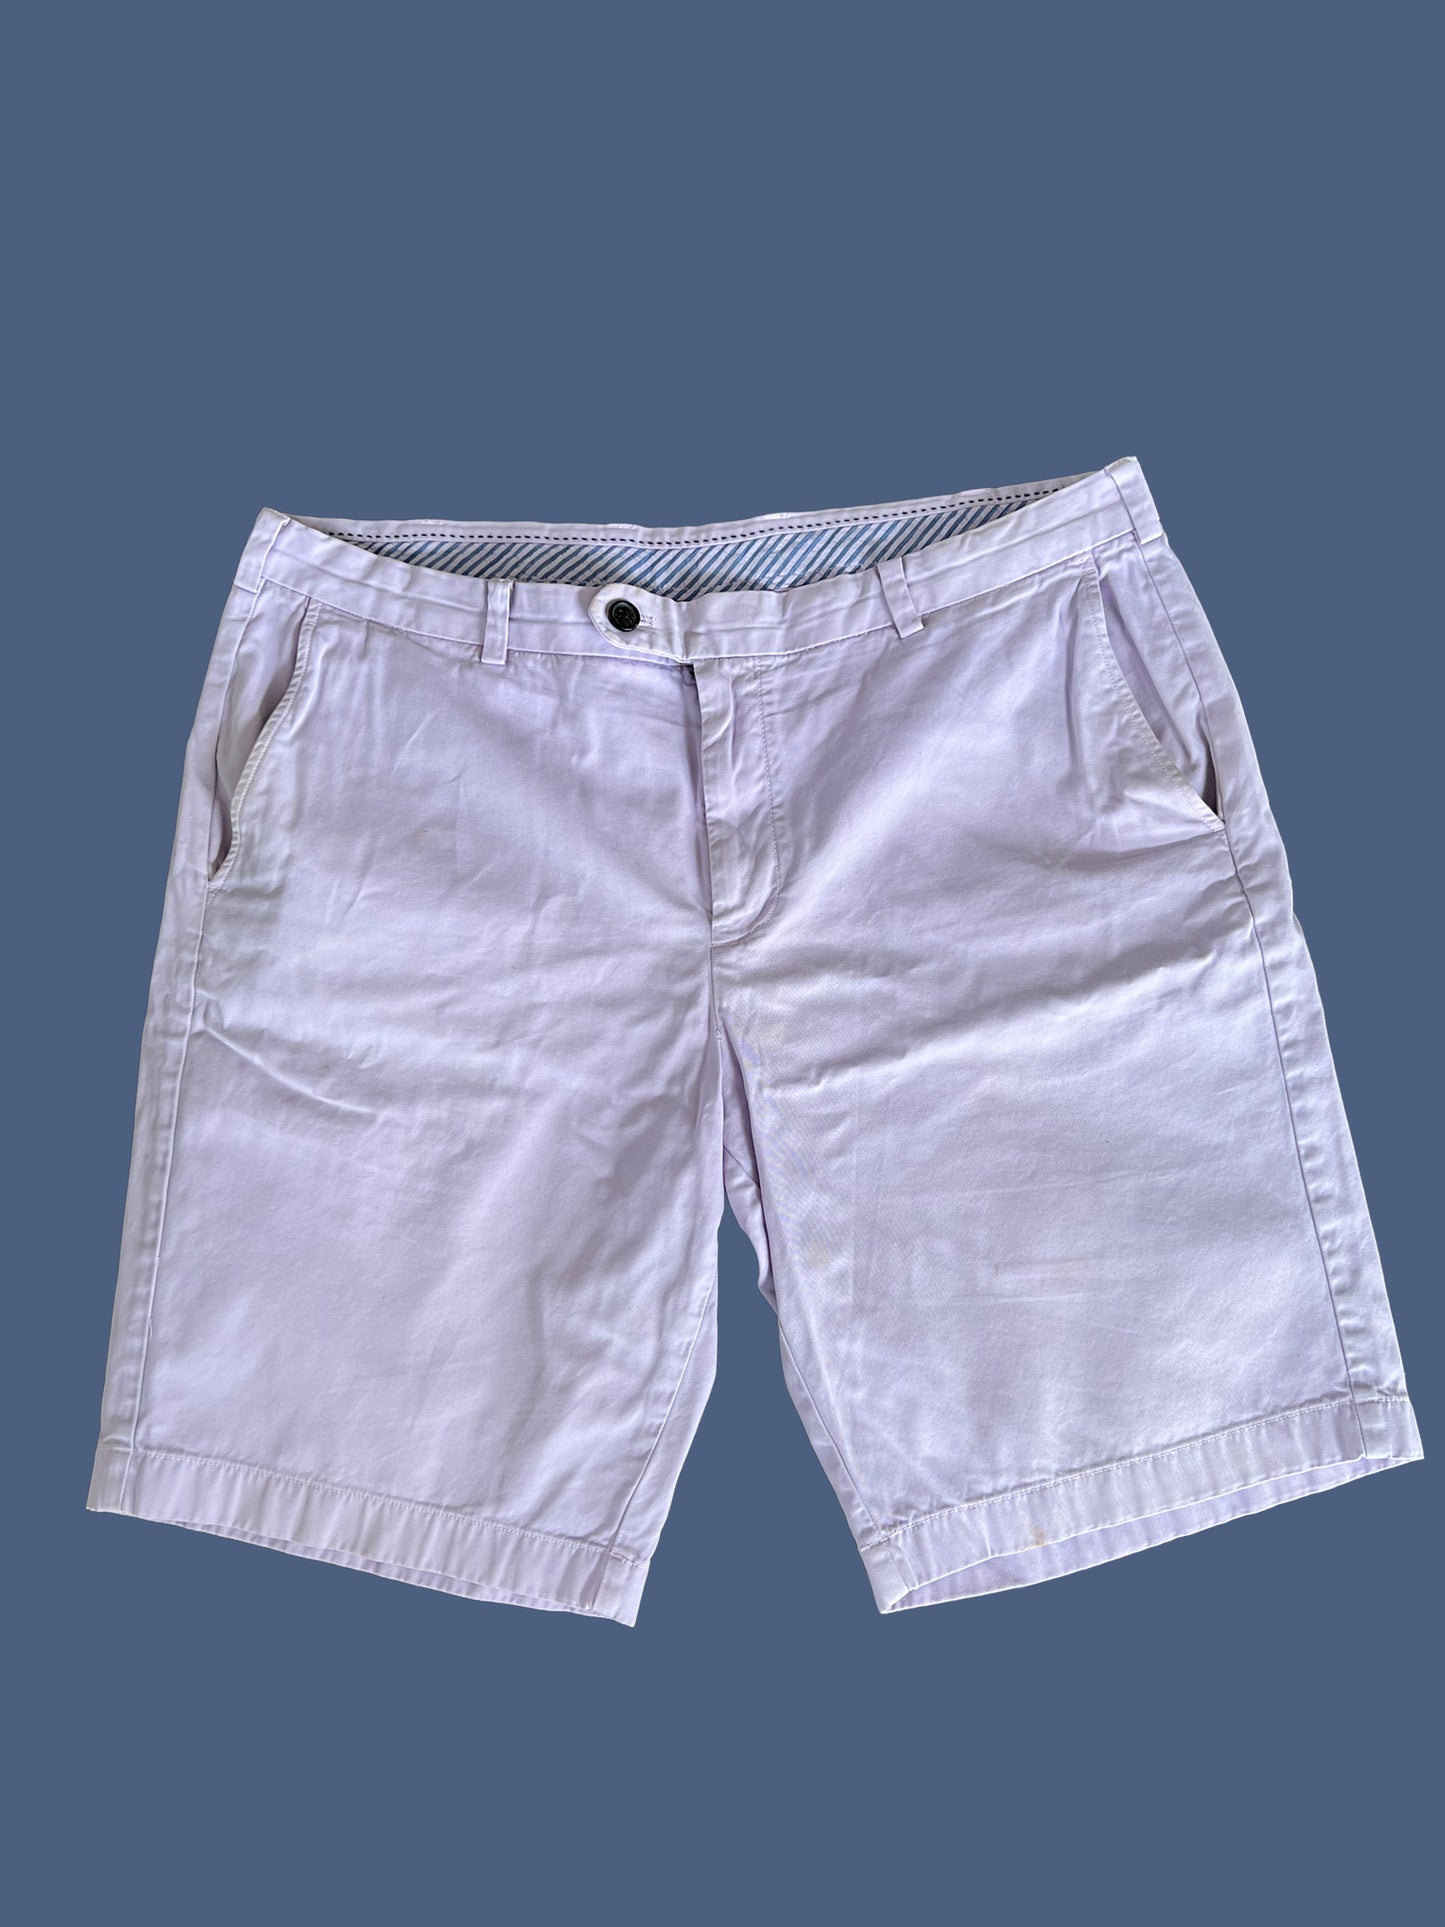 mens BROOKS BROTHERS shorts size xl